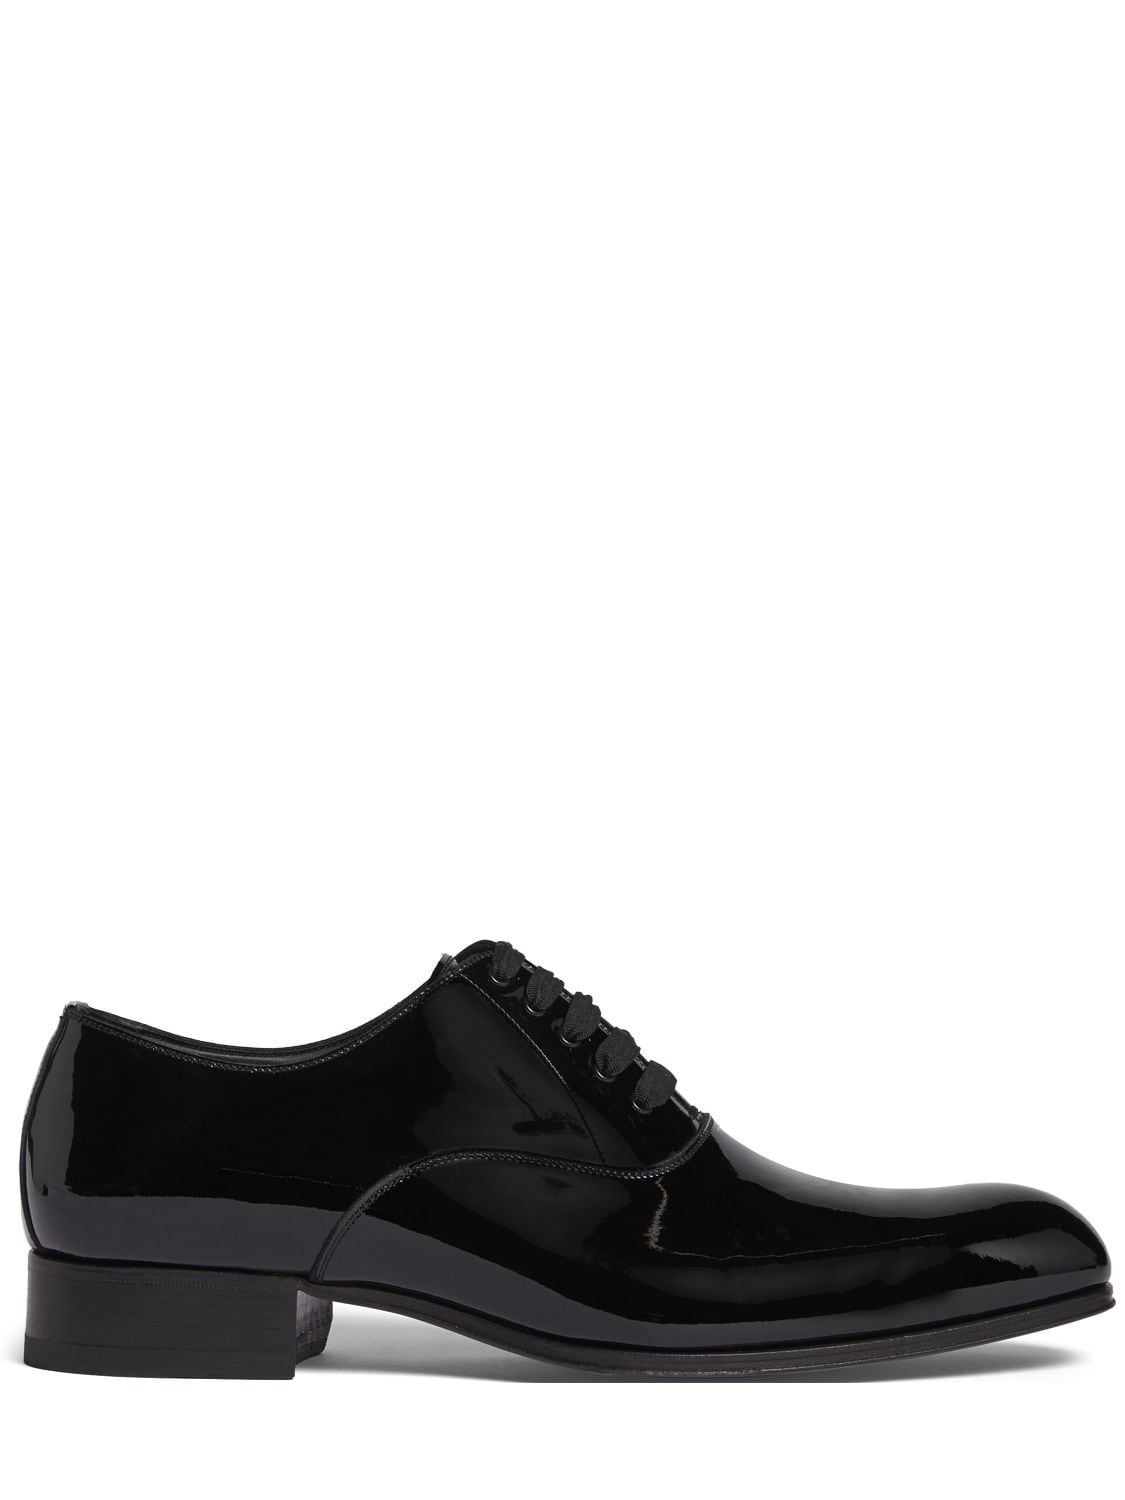 Tom Ford Patent Leather Derby Shoes In Black